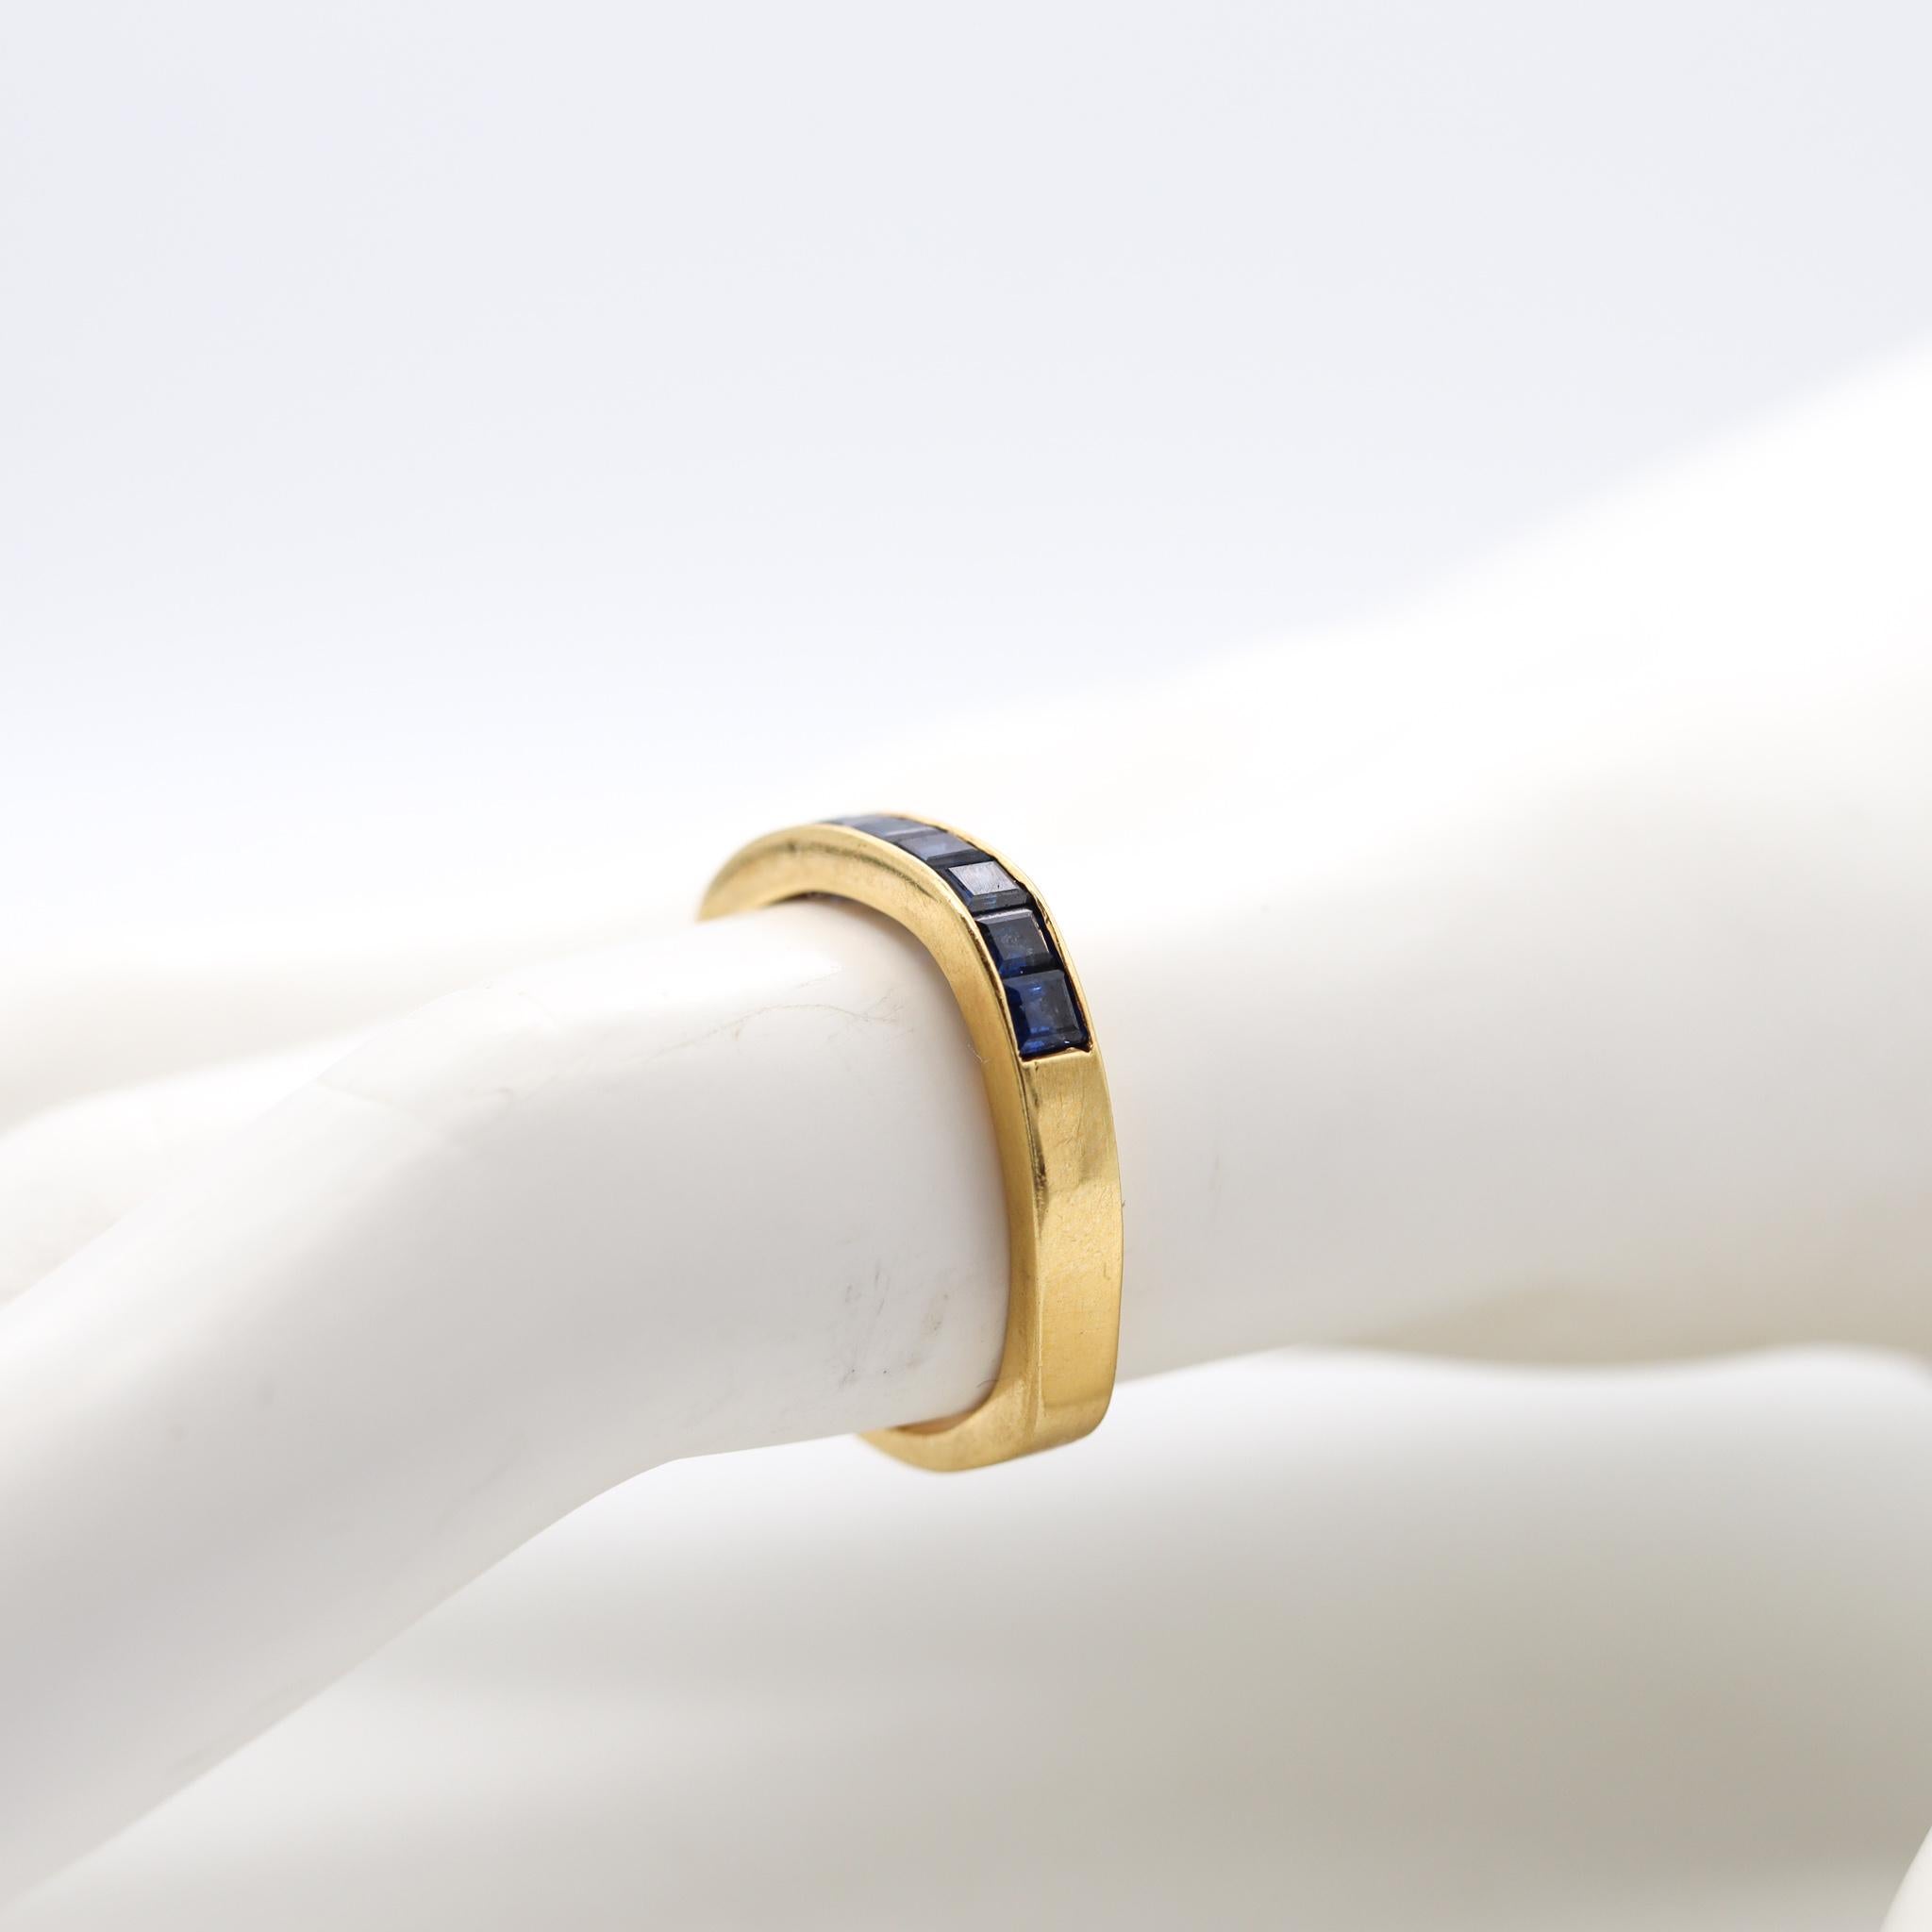 Modernist Gubelin 1970 by Paul Binder Squared Ring in 18Kt Gold with 1.12 Cts in Sapphires